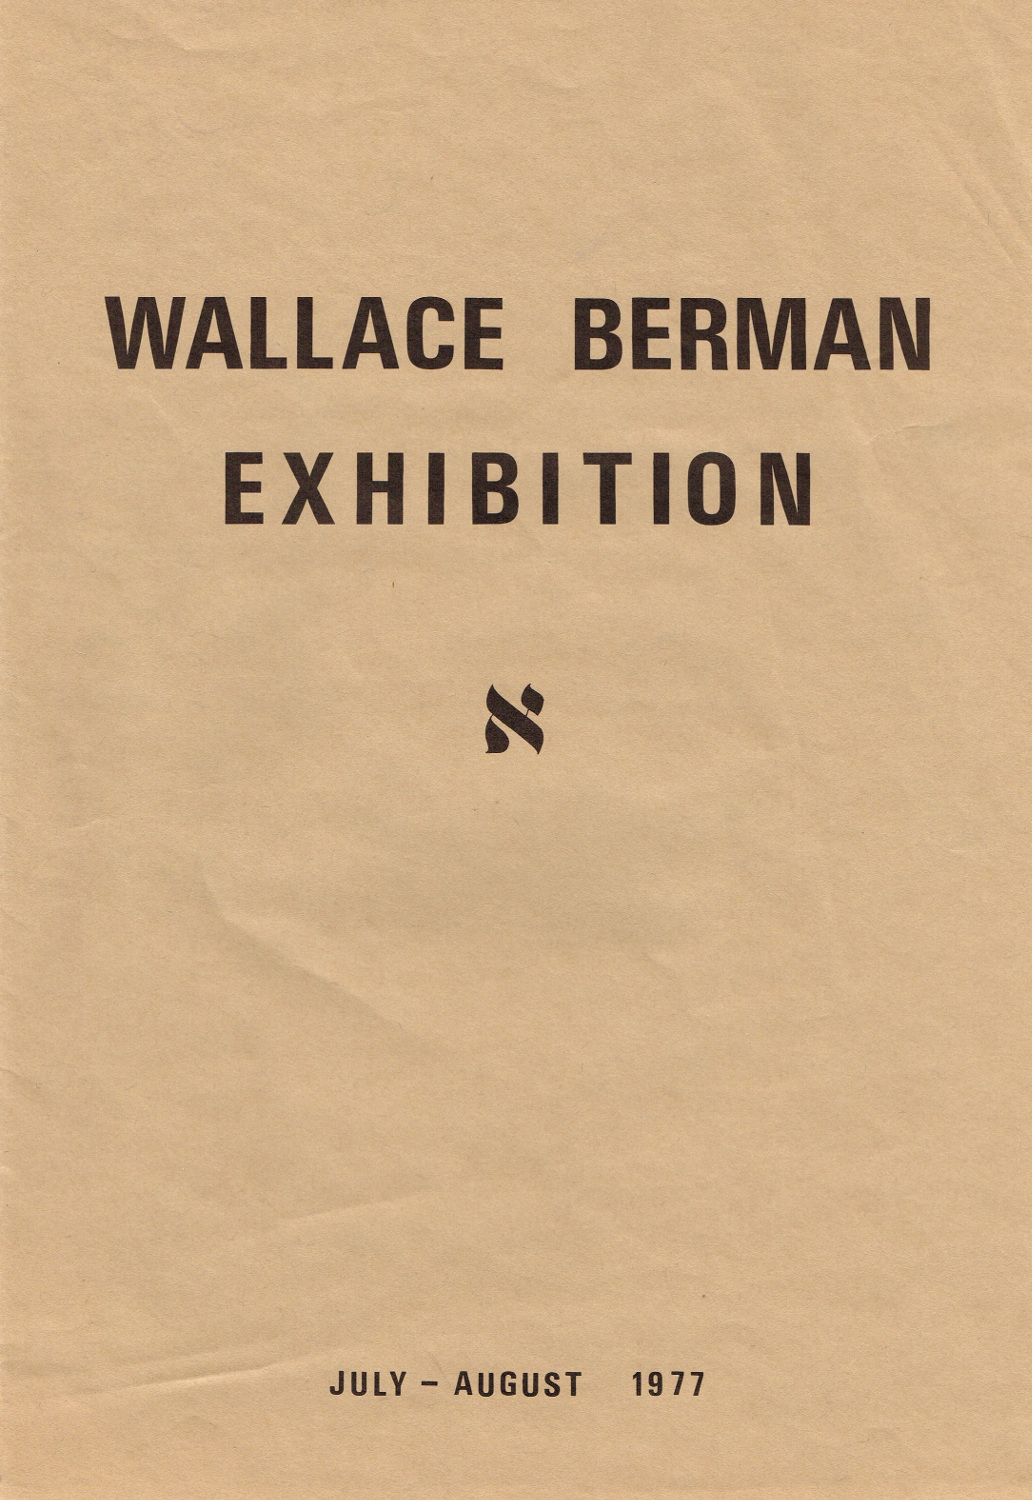 (BERMAN, WALLACE). Herms, George - WALLACE BERMAN EXHIBITION JULY - AUGUST 1977